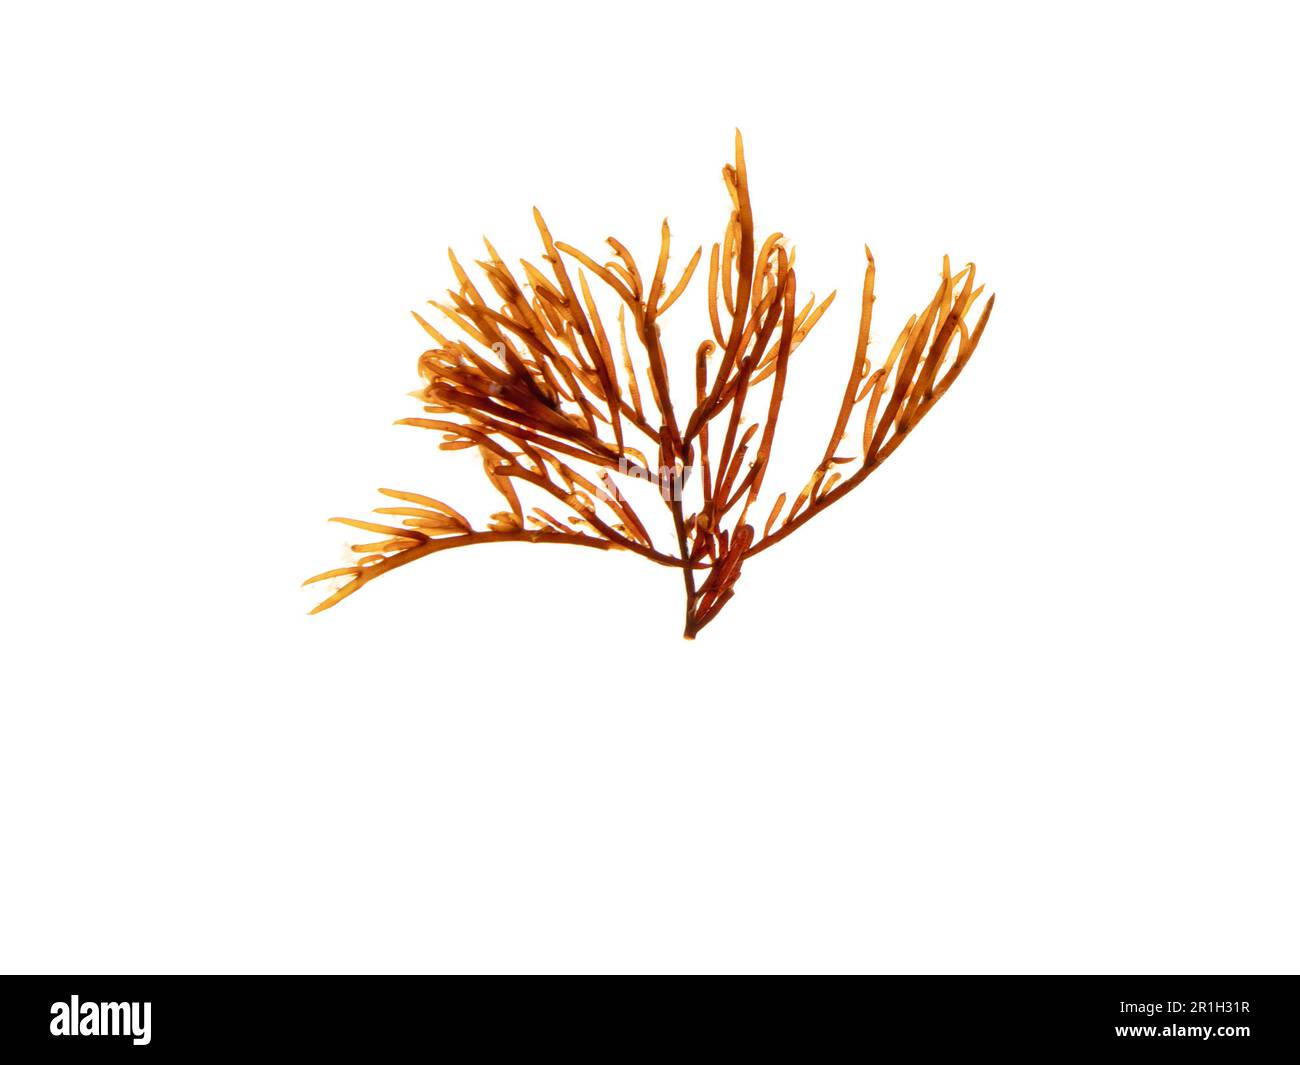 Brown algae branch isolated on white. Brown seaweed. Stock Photo